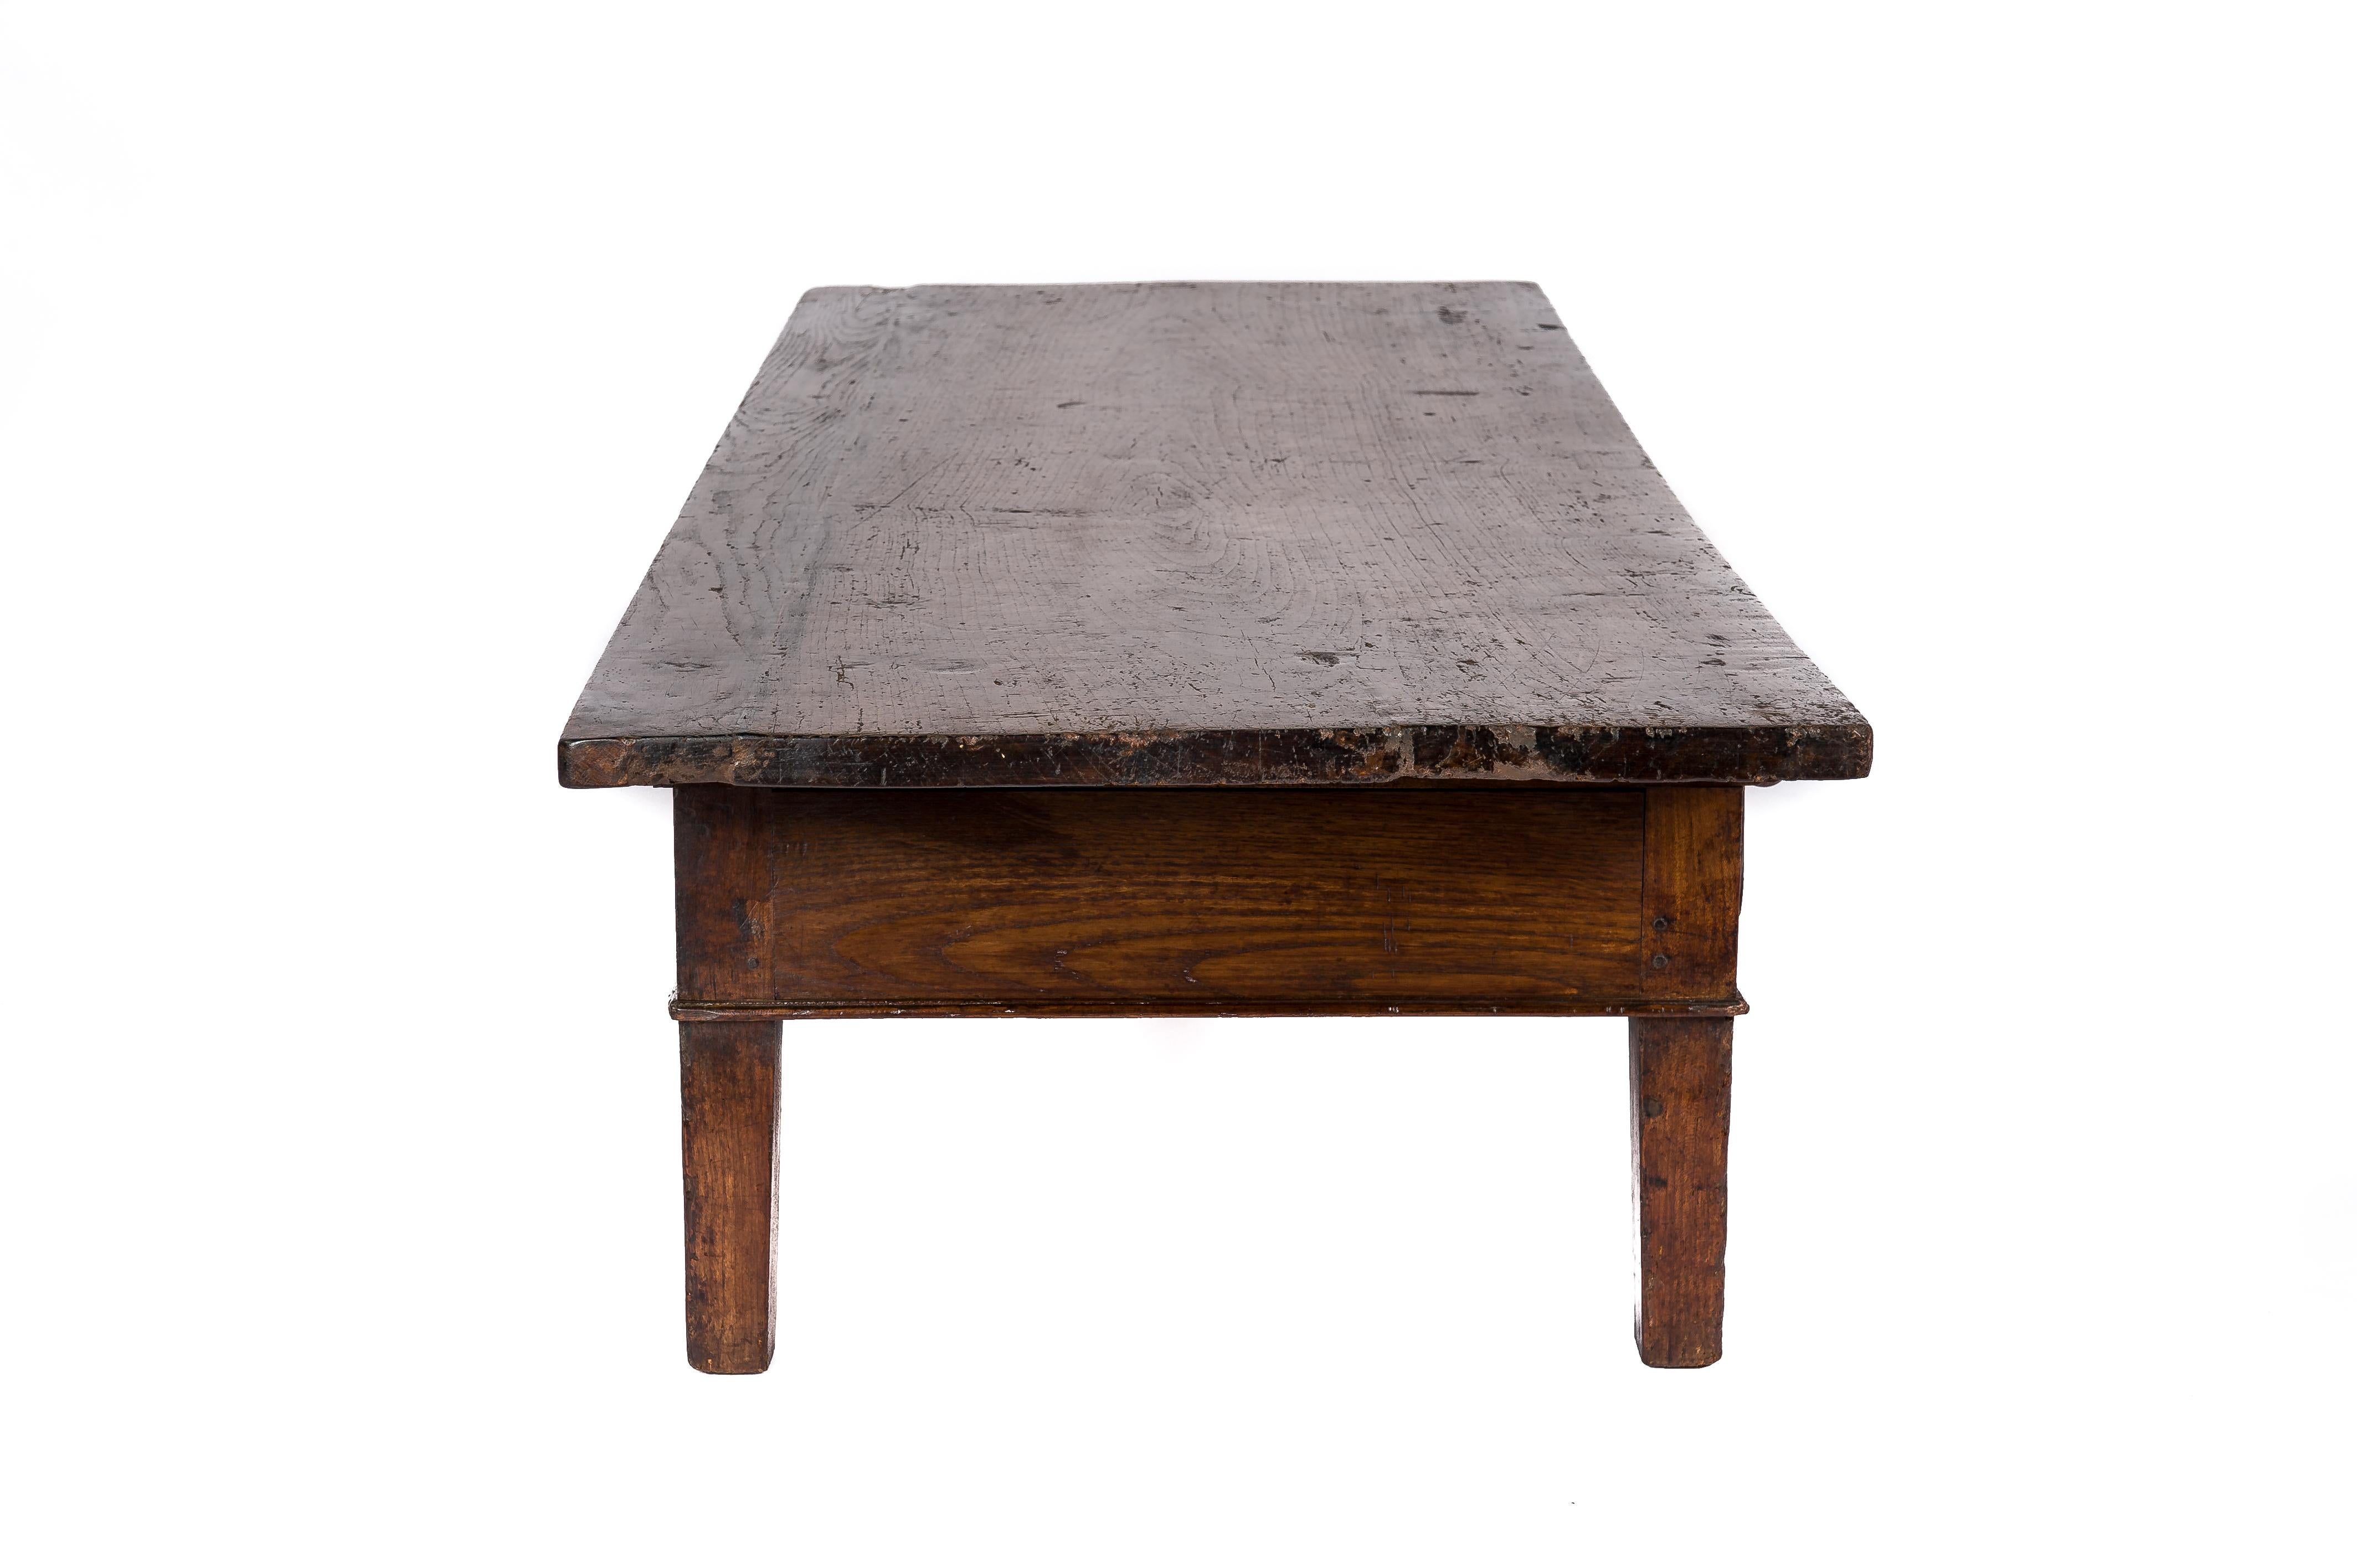 Antique Late 18th-Century Rustic Spanish Warm Brown Chestnut Coffee Table 1